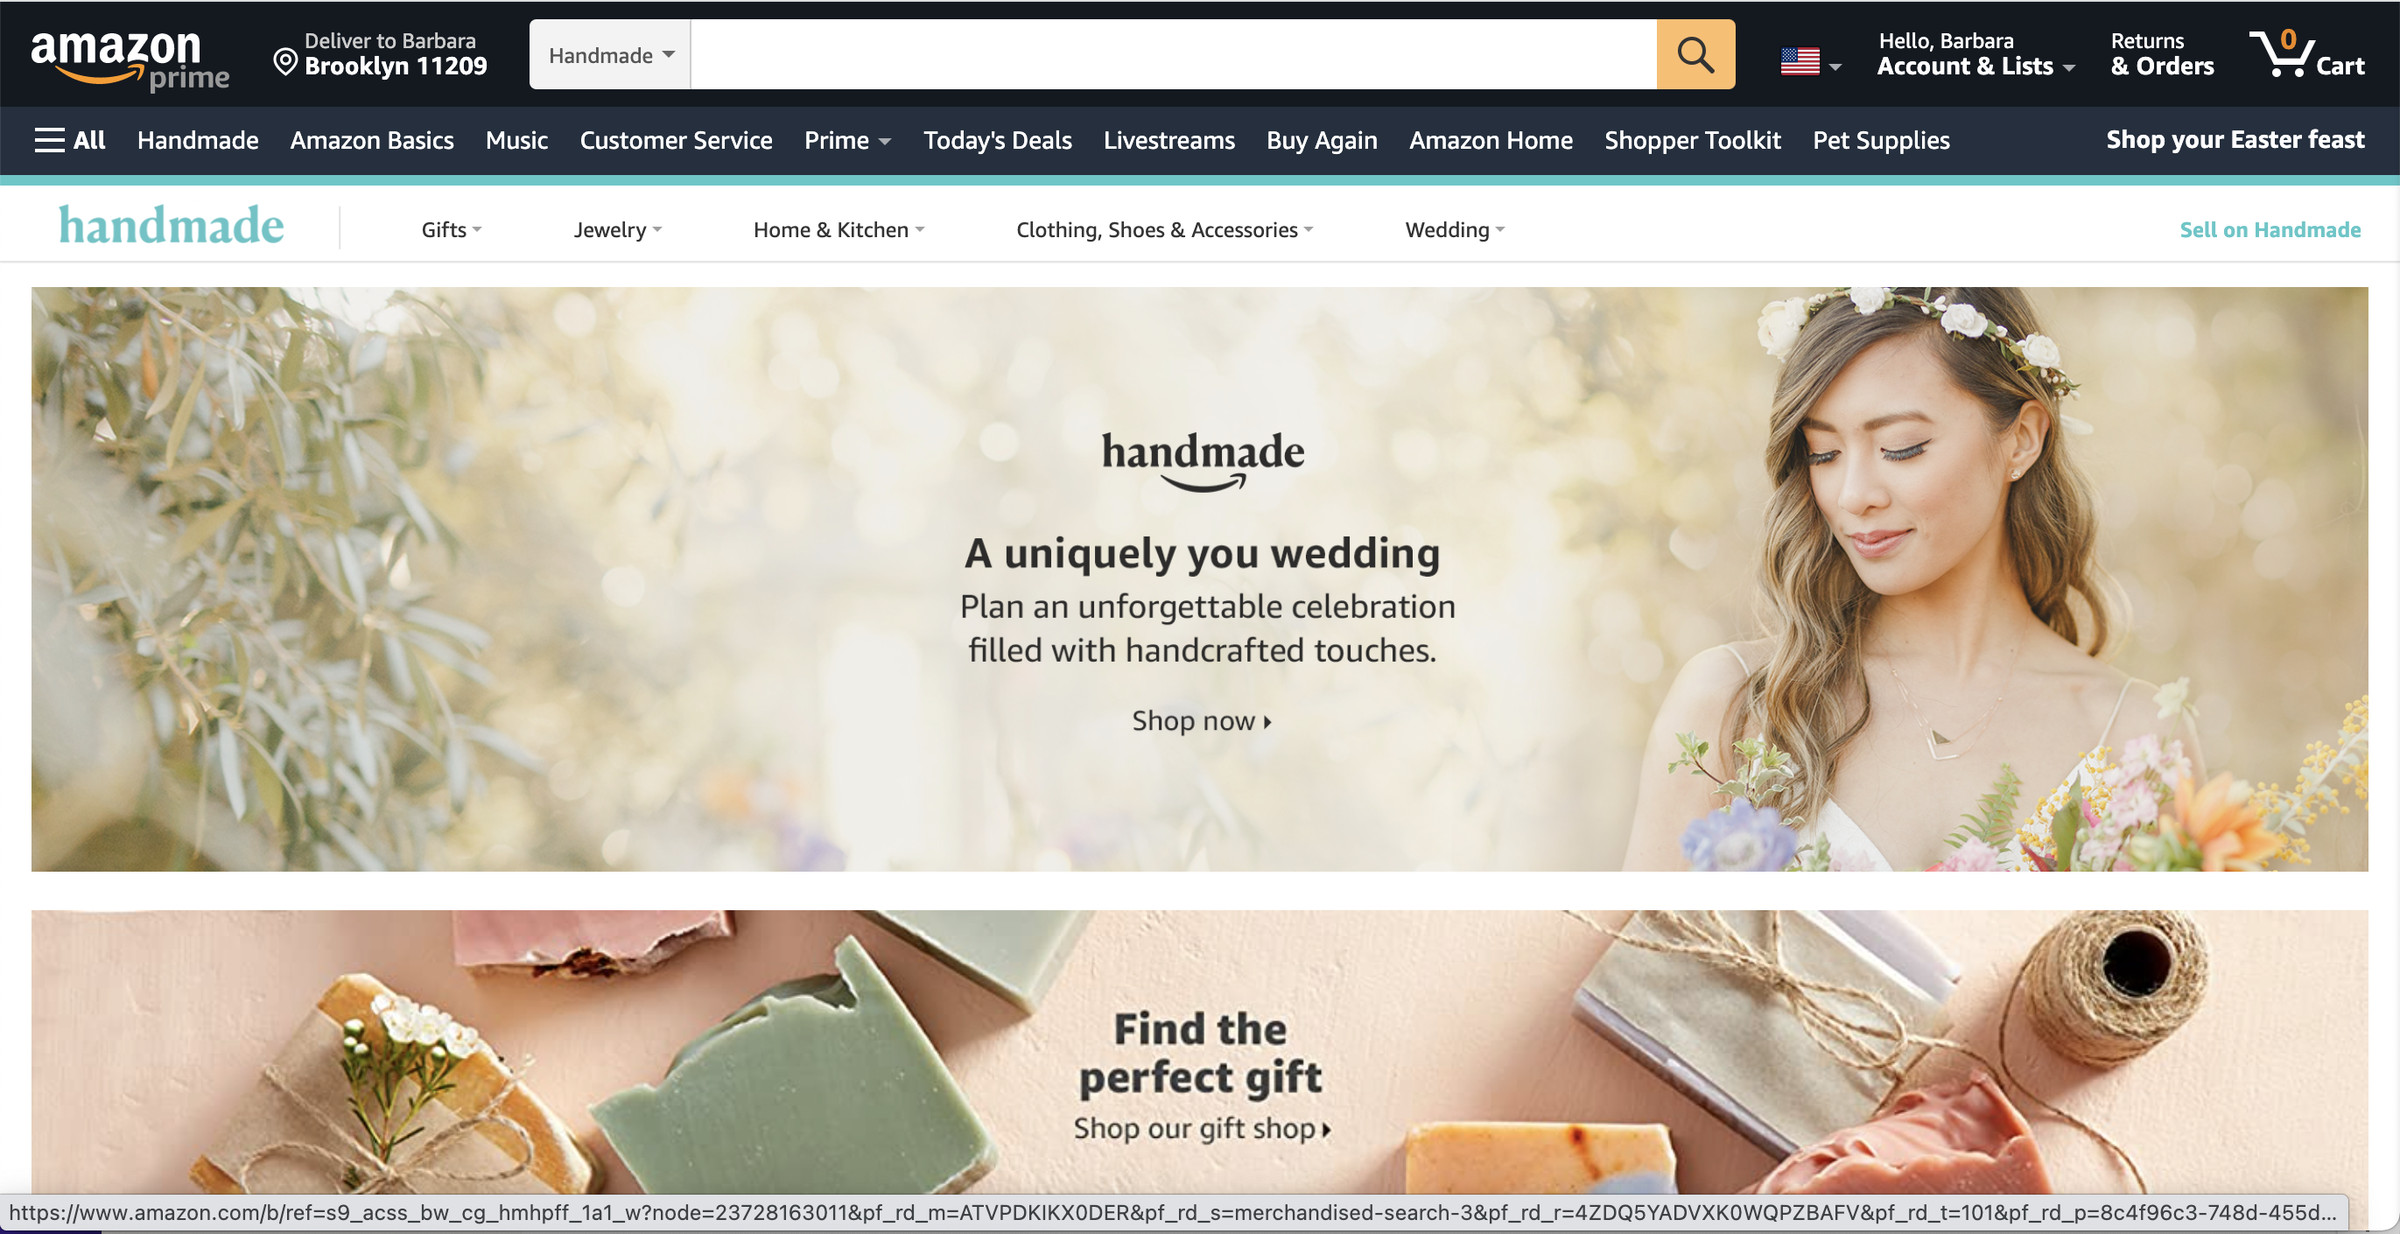 The Amazon Handmade page with a photo of a young woman and the caption “a uniquely you wedding” and underneath that, a photos of various products with “Find the perfect gift”